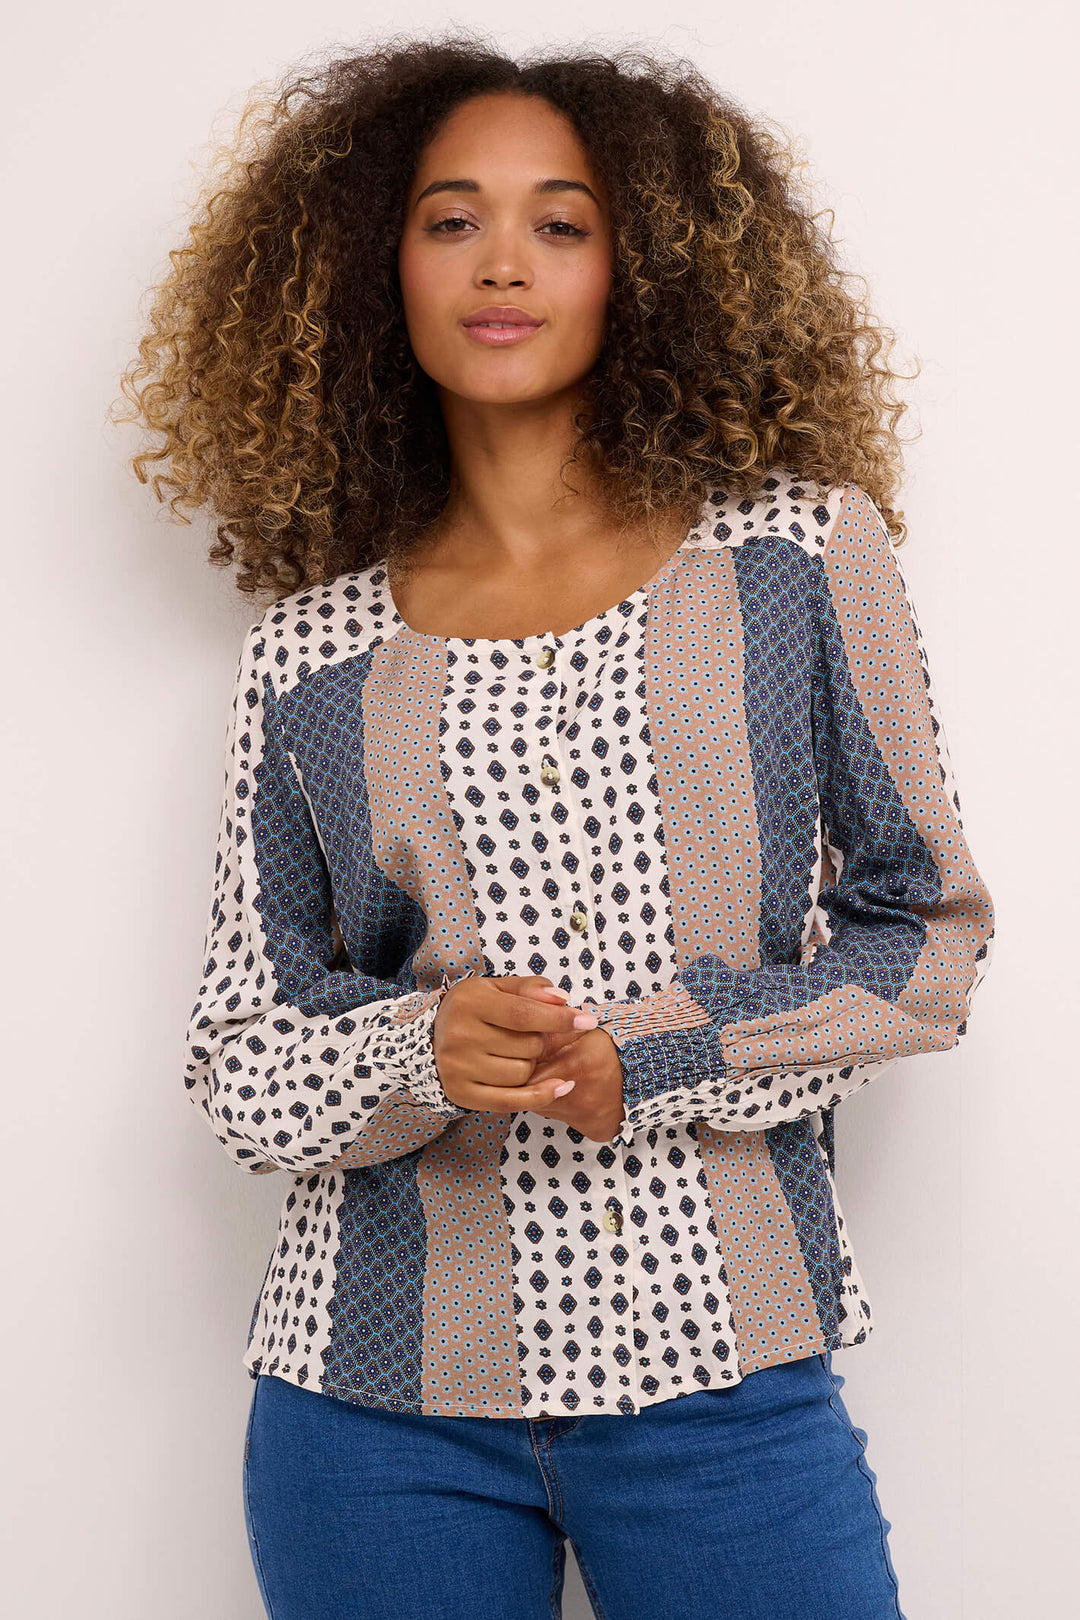 Cream Clothing CRMagda Alascan Blue Patchwork Blouse - Experience Boutique